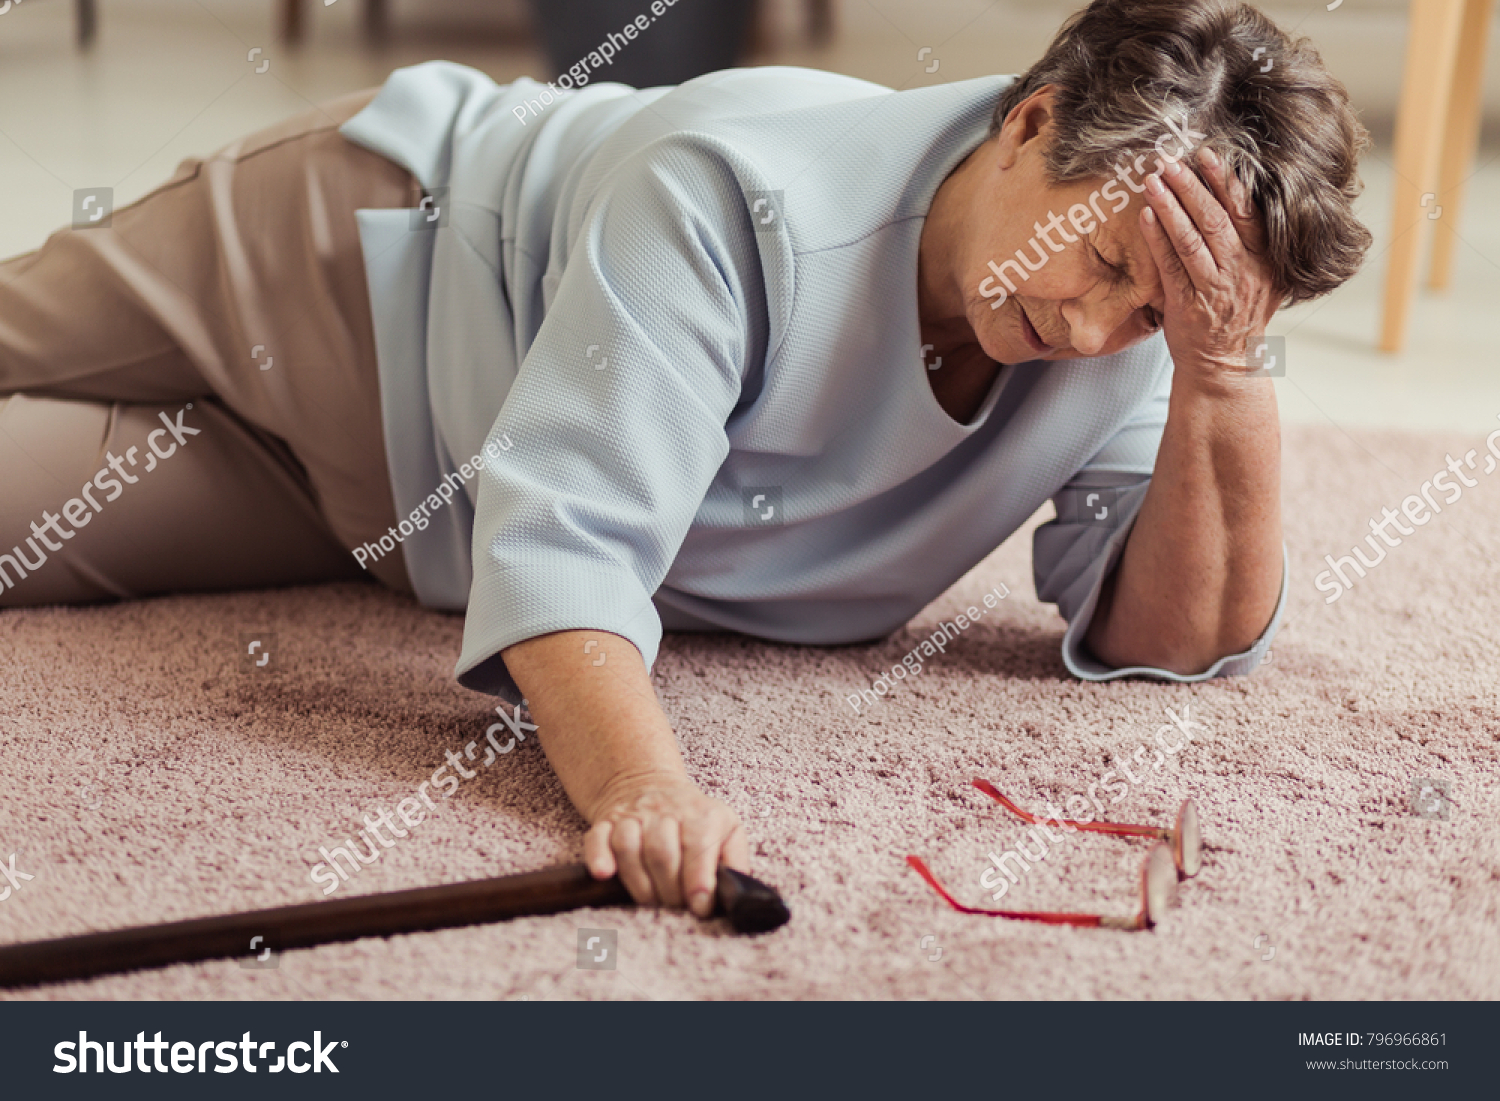 Sick senior woman with headache lying on the floor after falling down #796966861